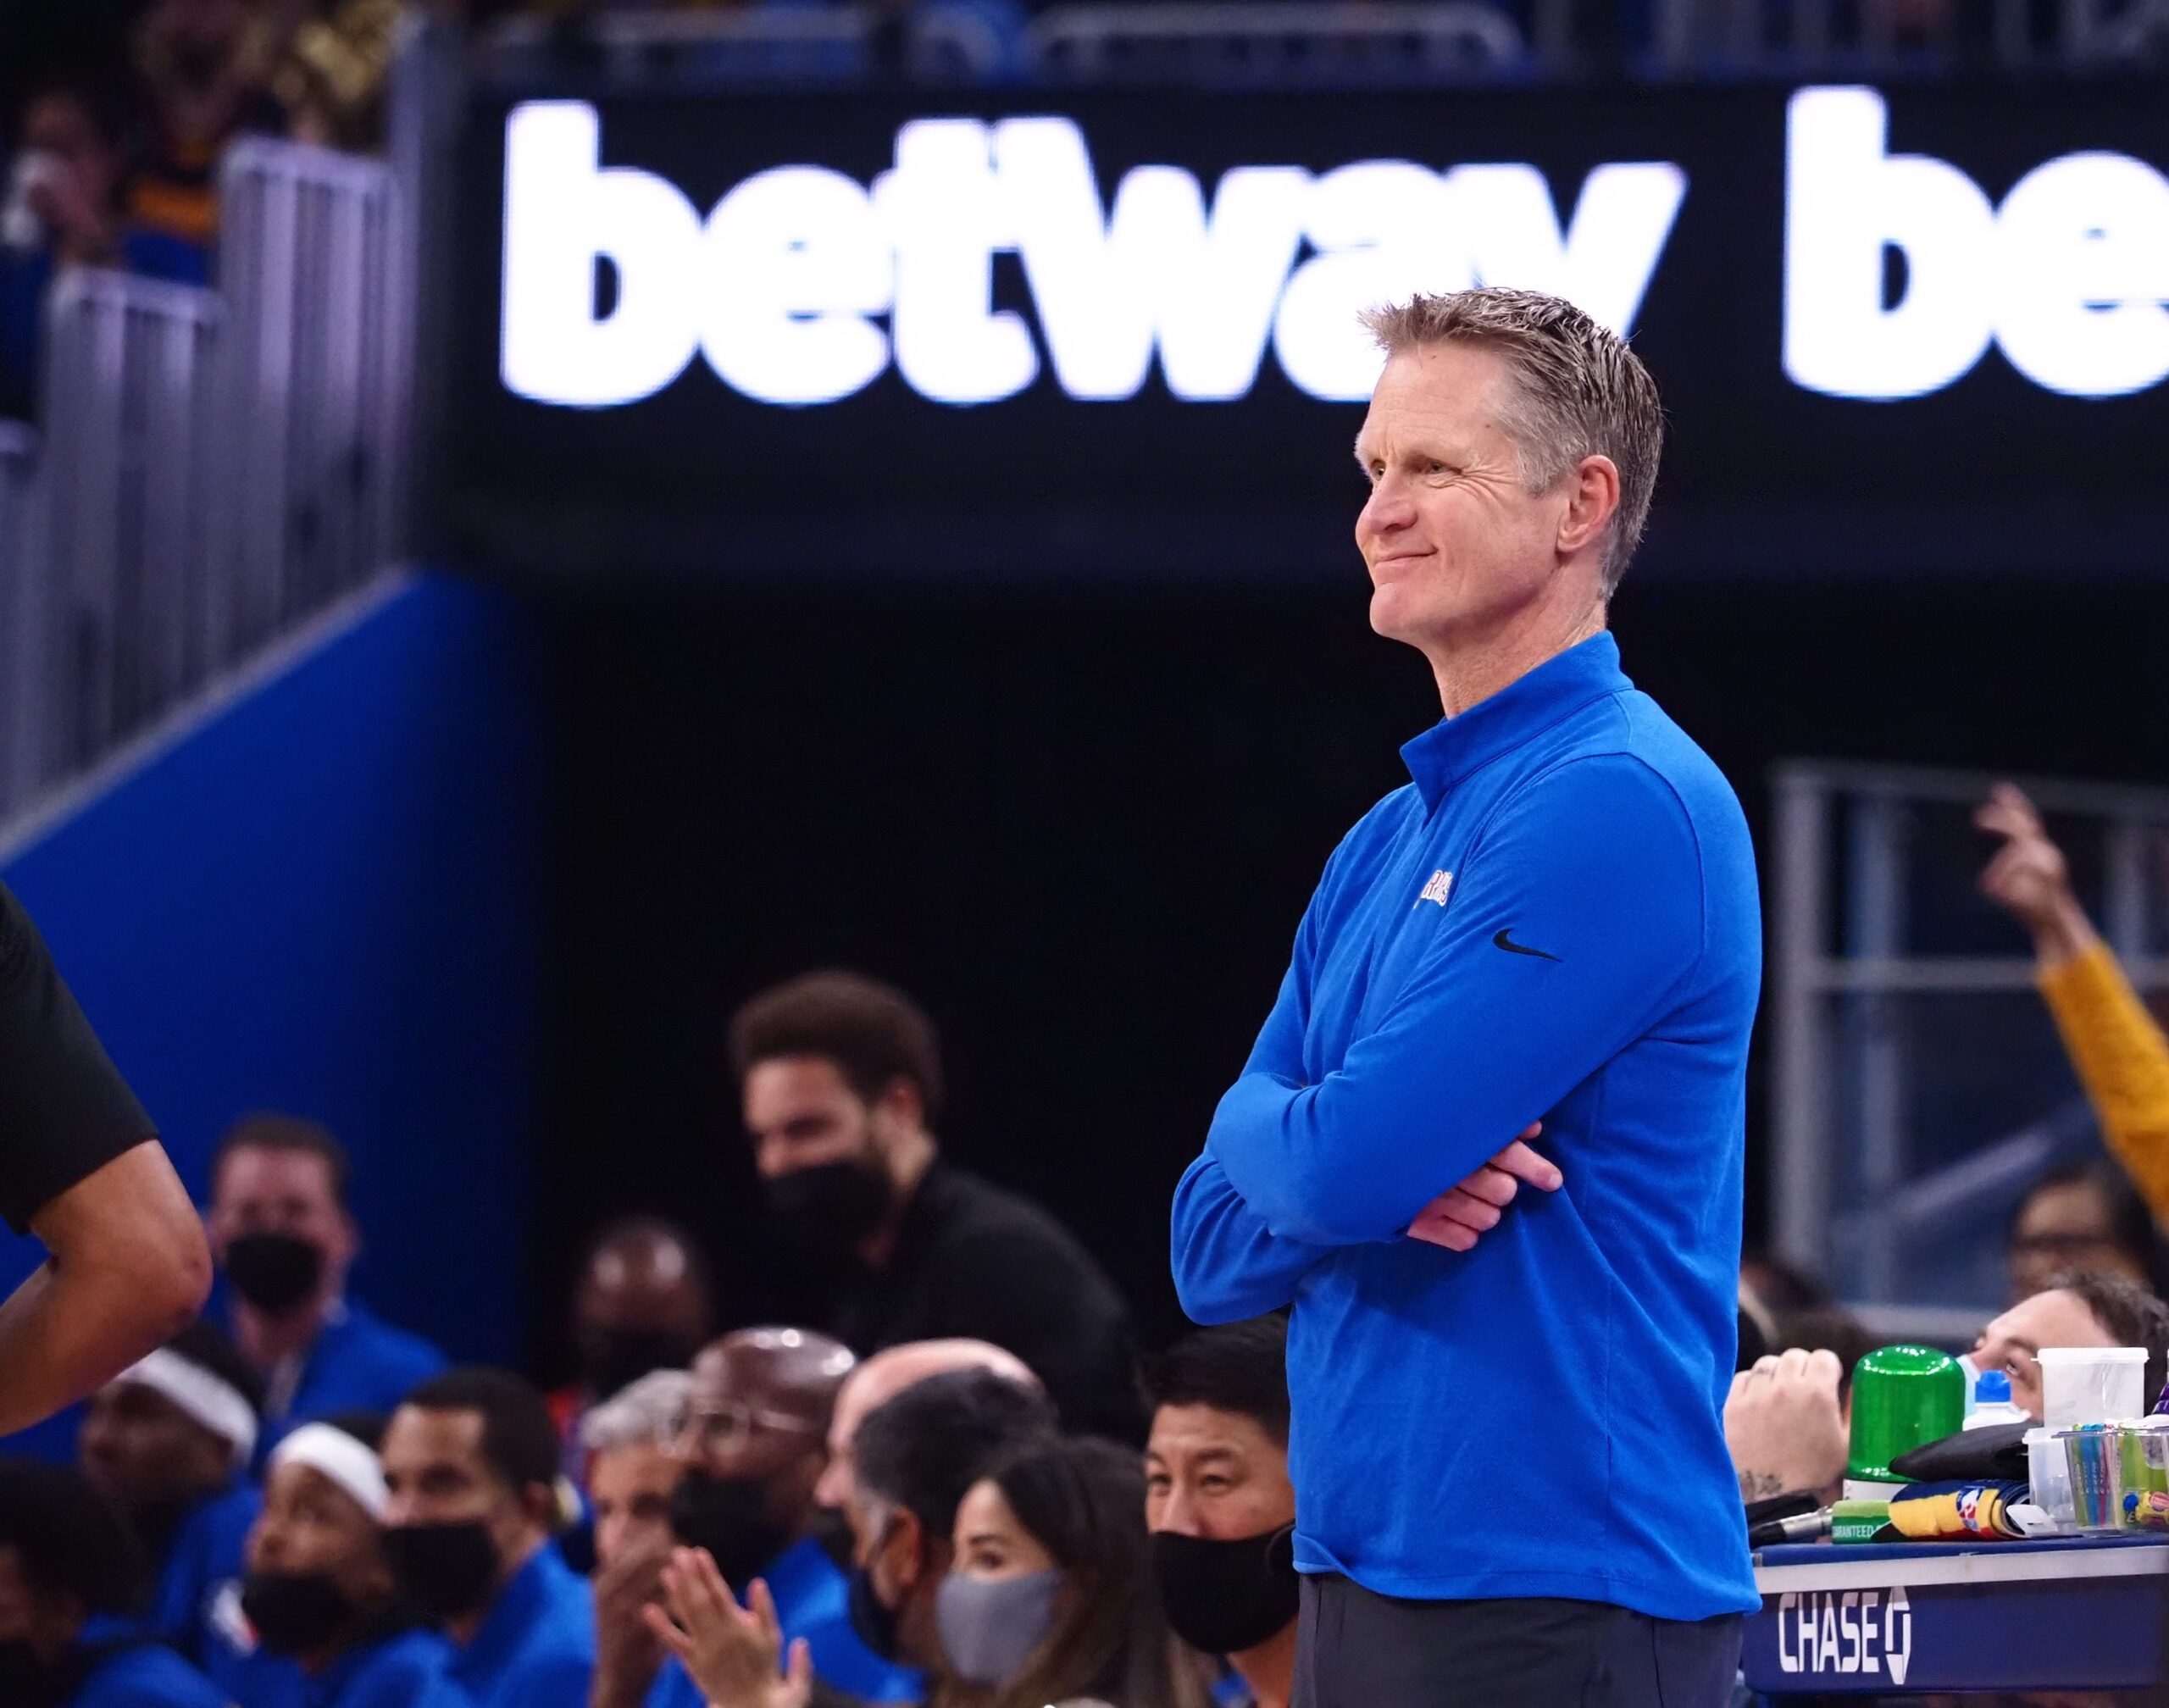 Steve Kerr to be next USA Basketball coach – reports